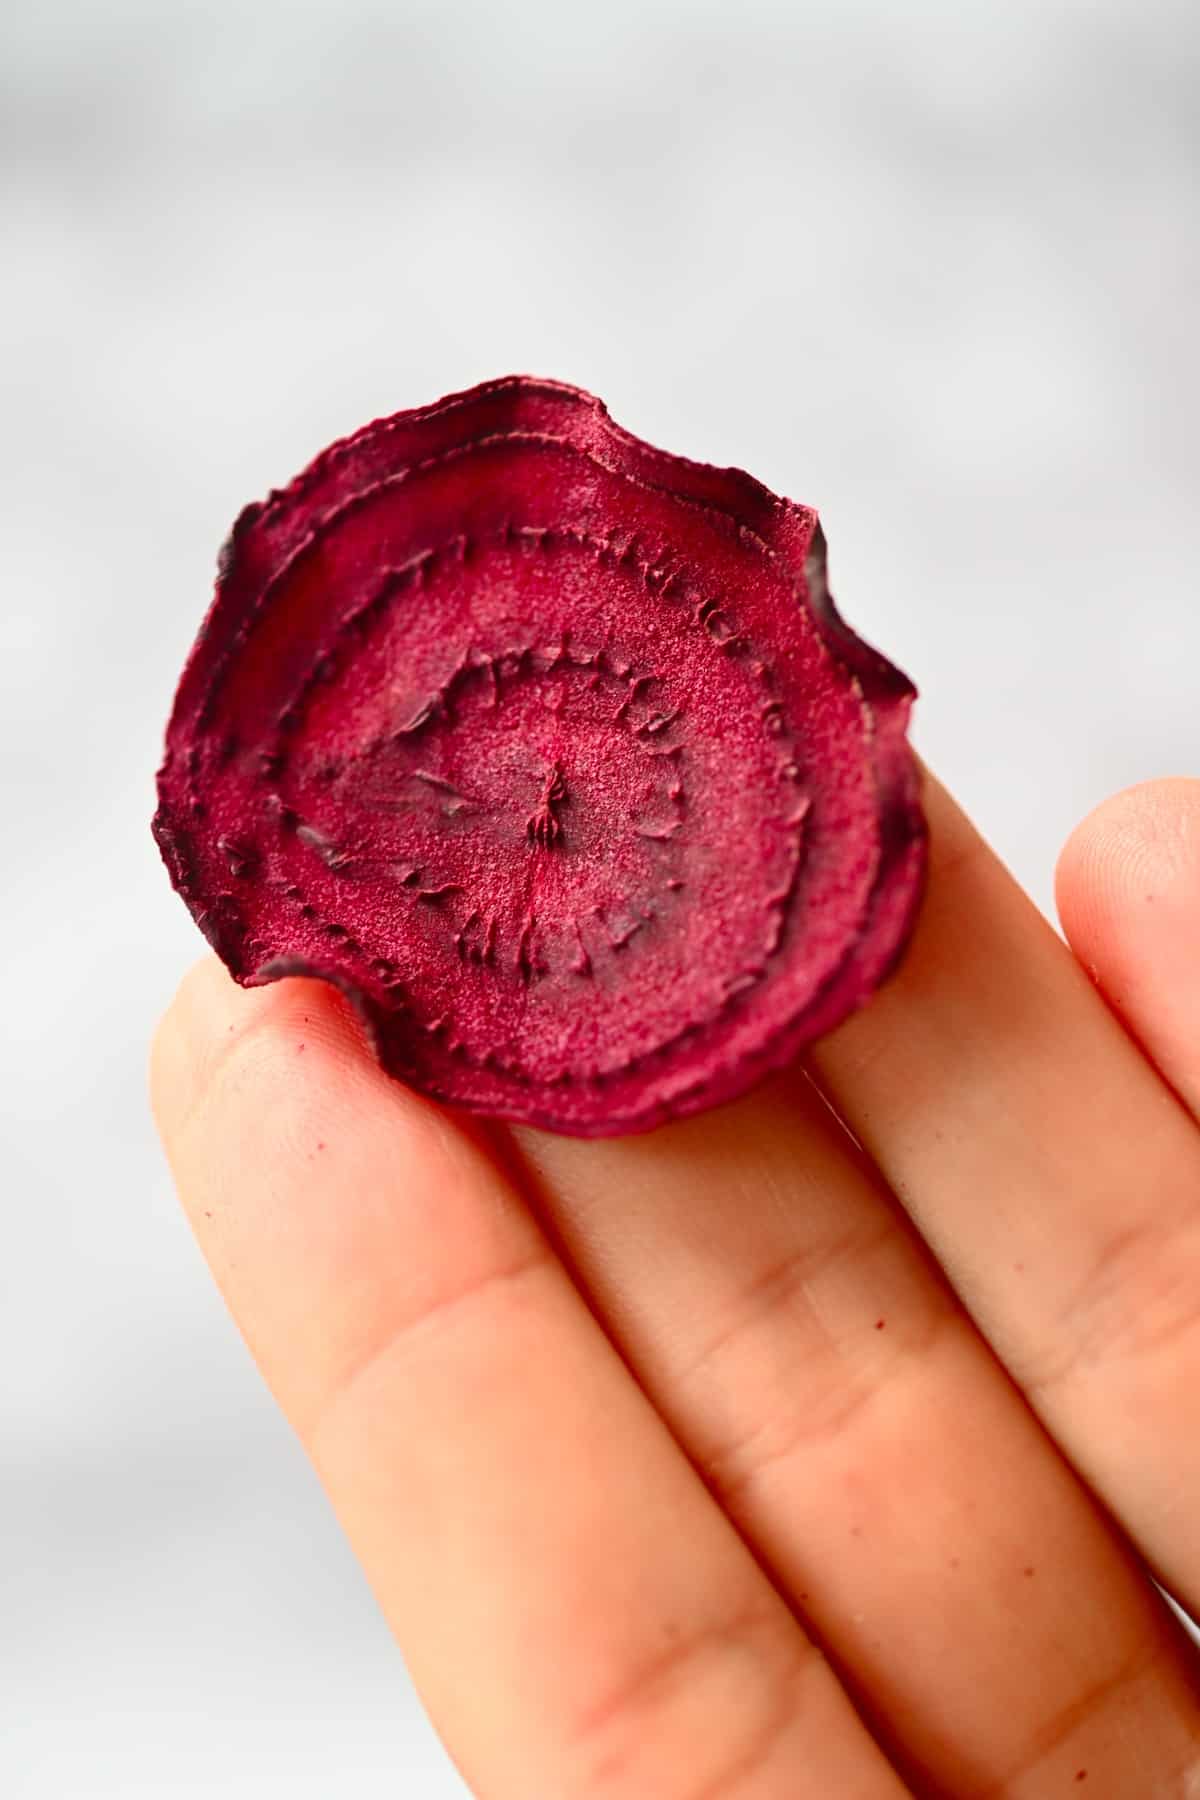 A beetroot chip in a hand